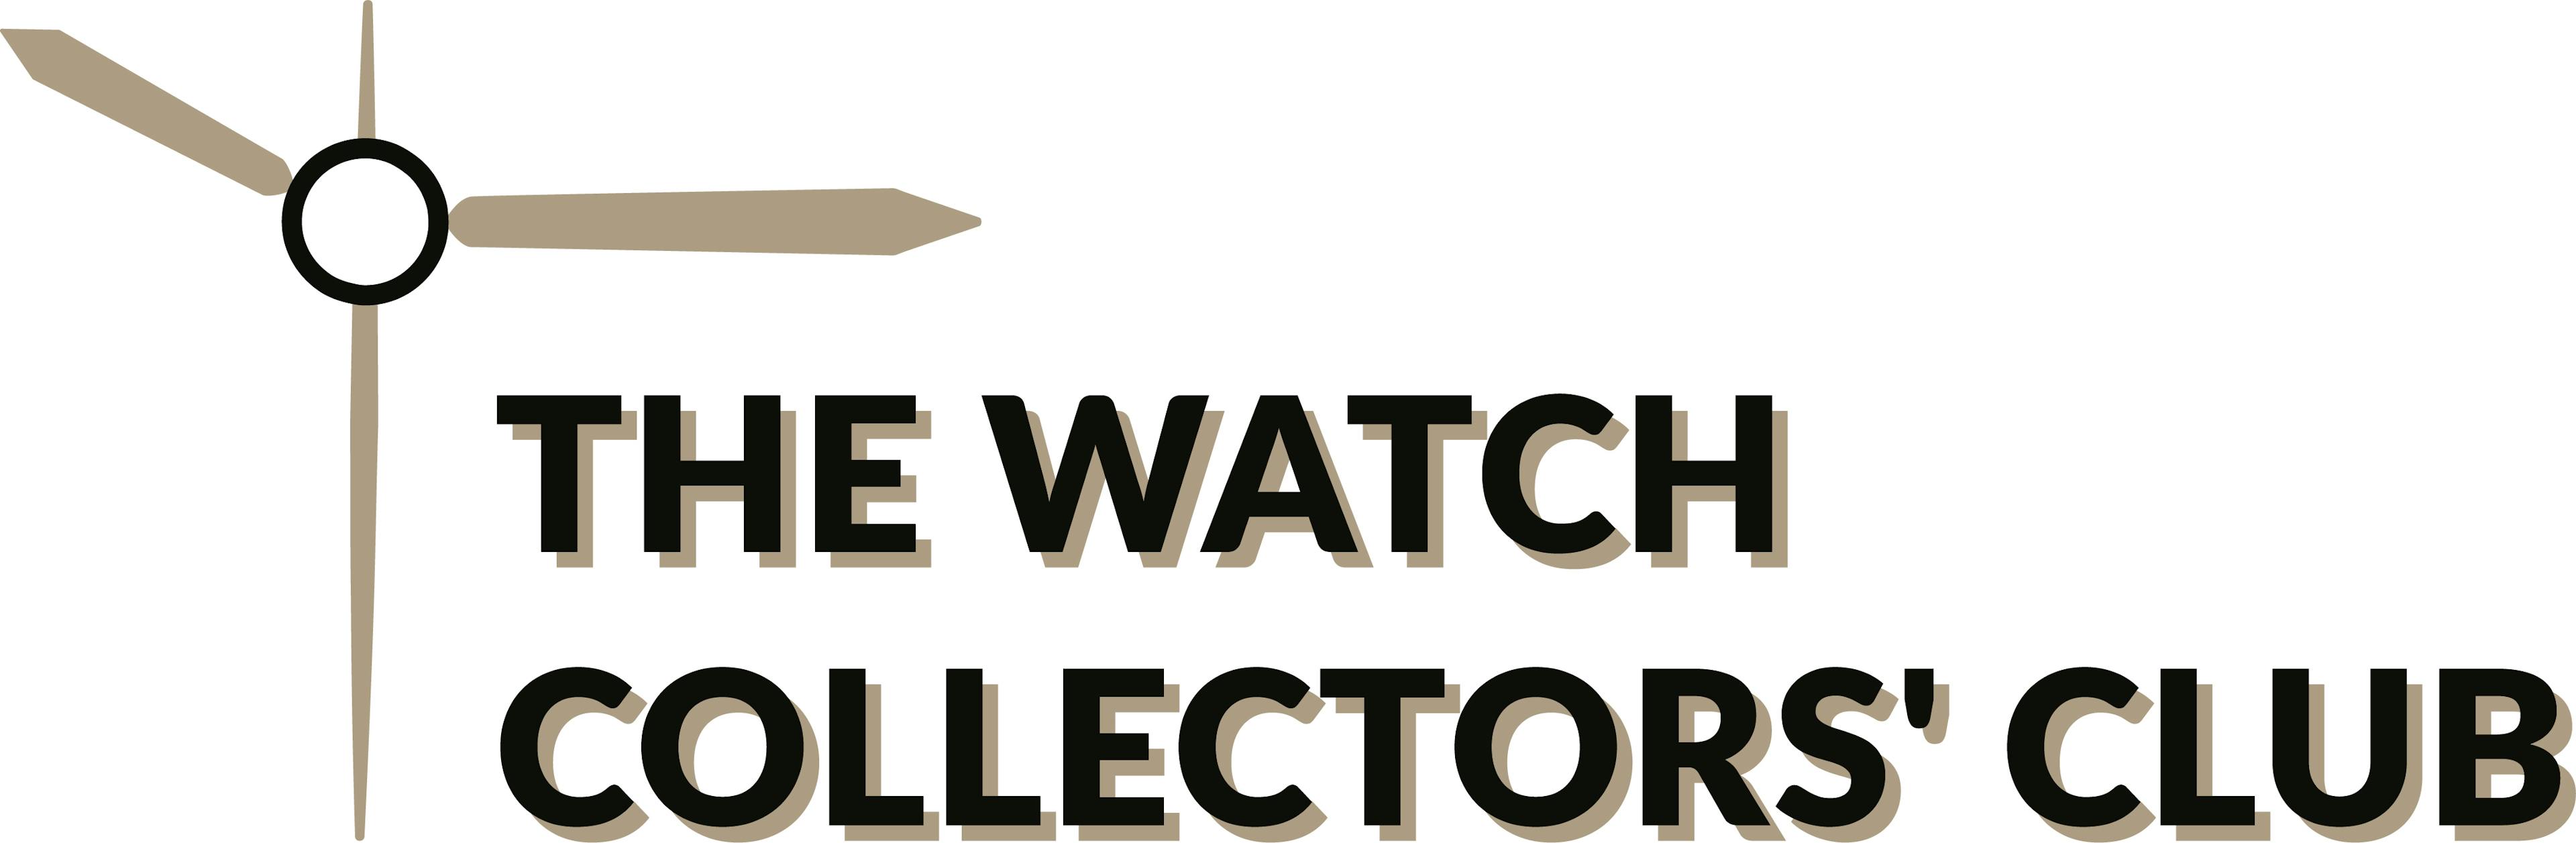 The Watch Collectors' Club Logo